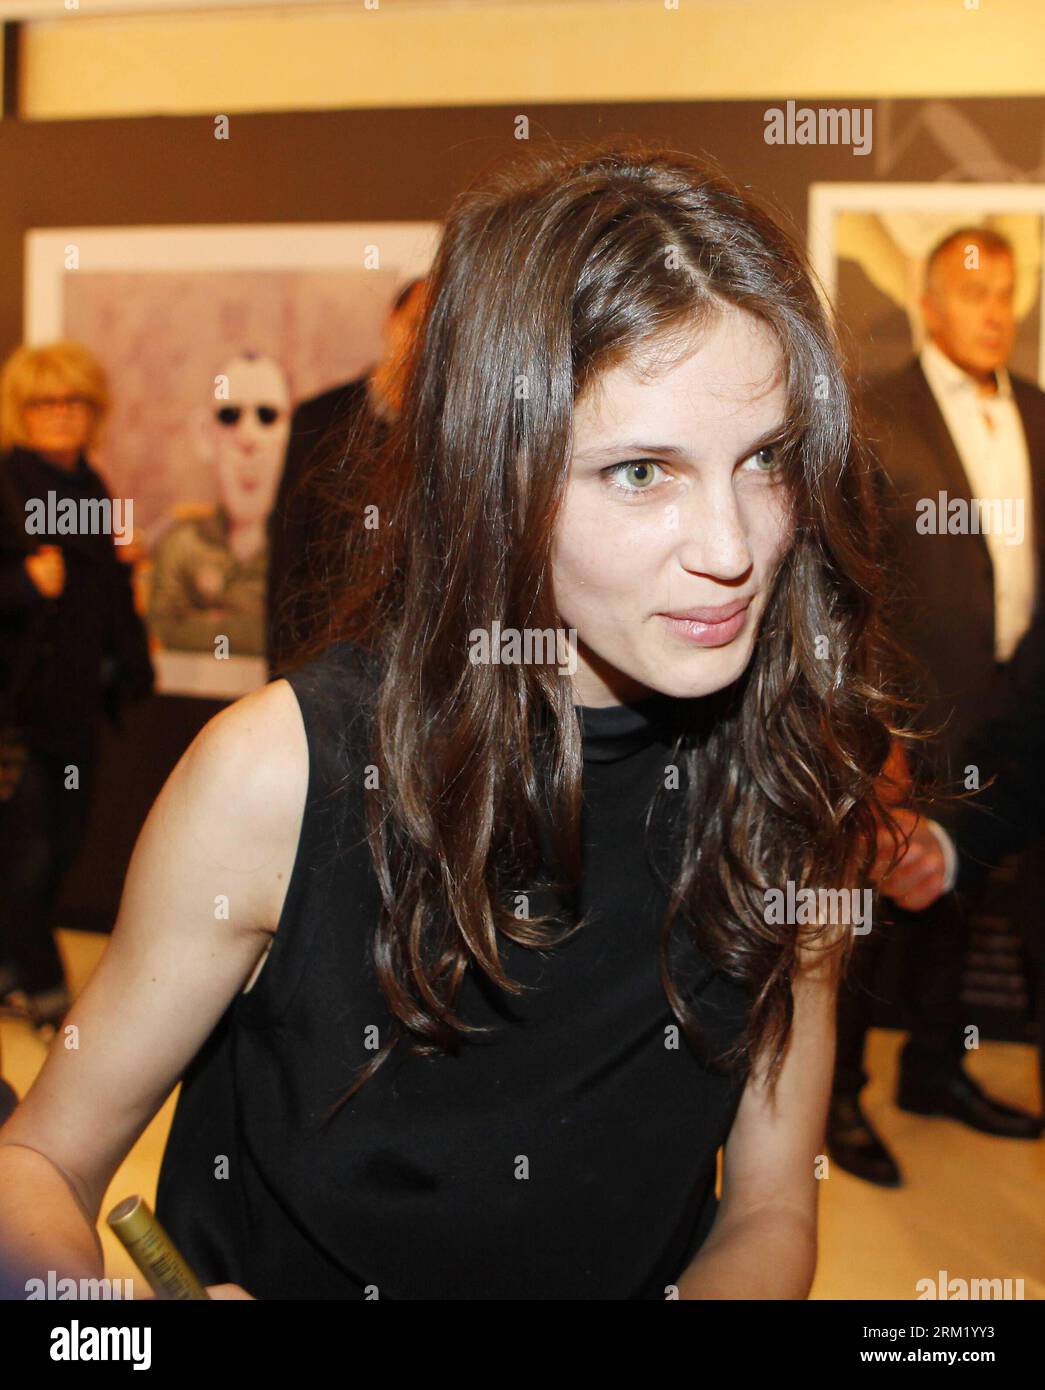 Bildnummer: 59653628  Datum: 16.05.2013  Copyright: imago/Xinhua (130516) -- CANNES, May 16, 2013 (Xinhua) -- French actress Marine Vacth arrives to attend a press conference of the film Jeune & Jolie (Young & Beautiful) by director Francois Ozon at the 66th Cannes Film Festival in Cannes, southern France, May 16, 2013. (Xinhua/Zhou Lei) FRANCE-CANNES-FILM FESTIVAL-JEUNE & JOLIE PUBLICATIONxNOTxINxCHN Kultur Entertainment People Film 66 Internationale Filmfestspiele Cannes x0x xsk 2013 hoch      59653628 Date 16 05 2013 Copyright Imago XINHUA  Cannes May 16 2013 XINHUA French actress Navy  arr Stock Photo